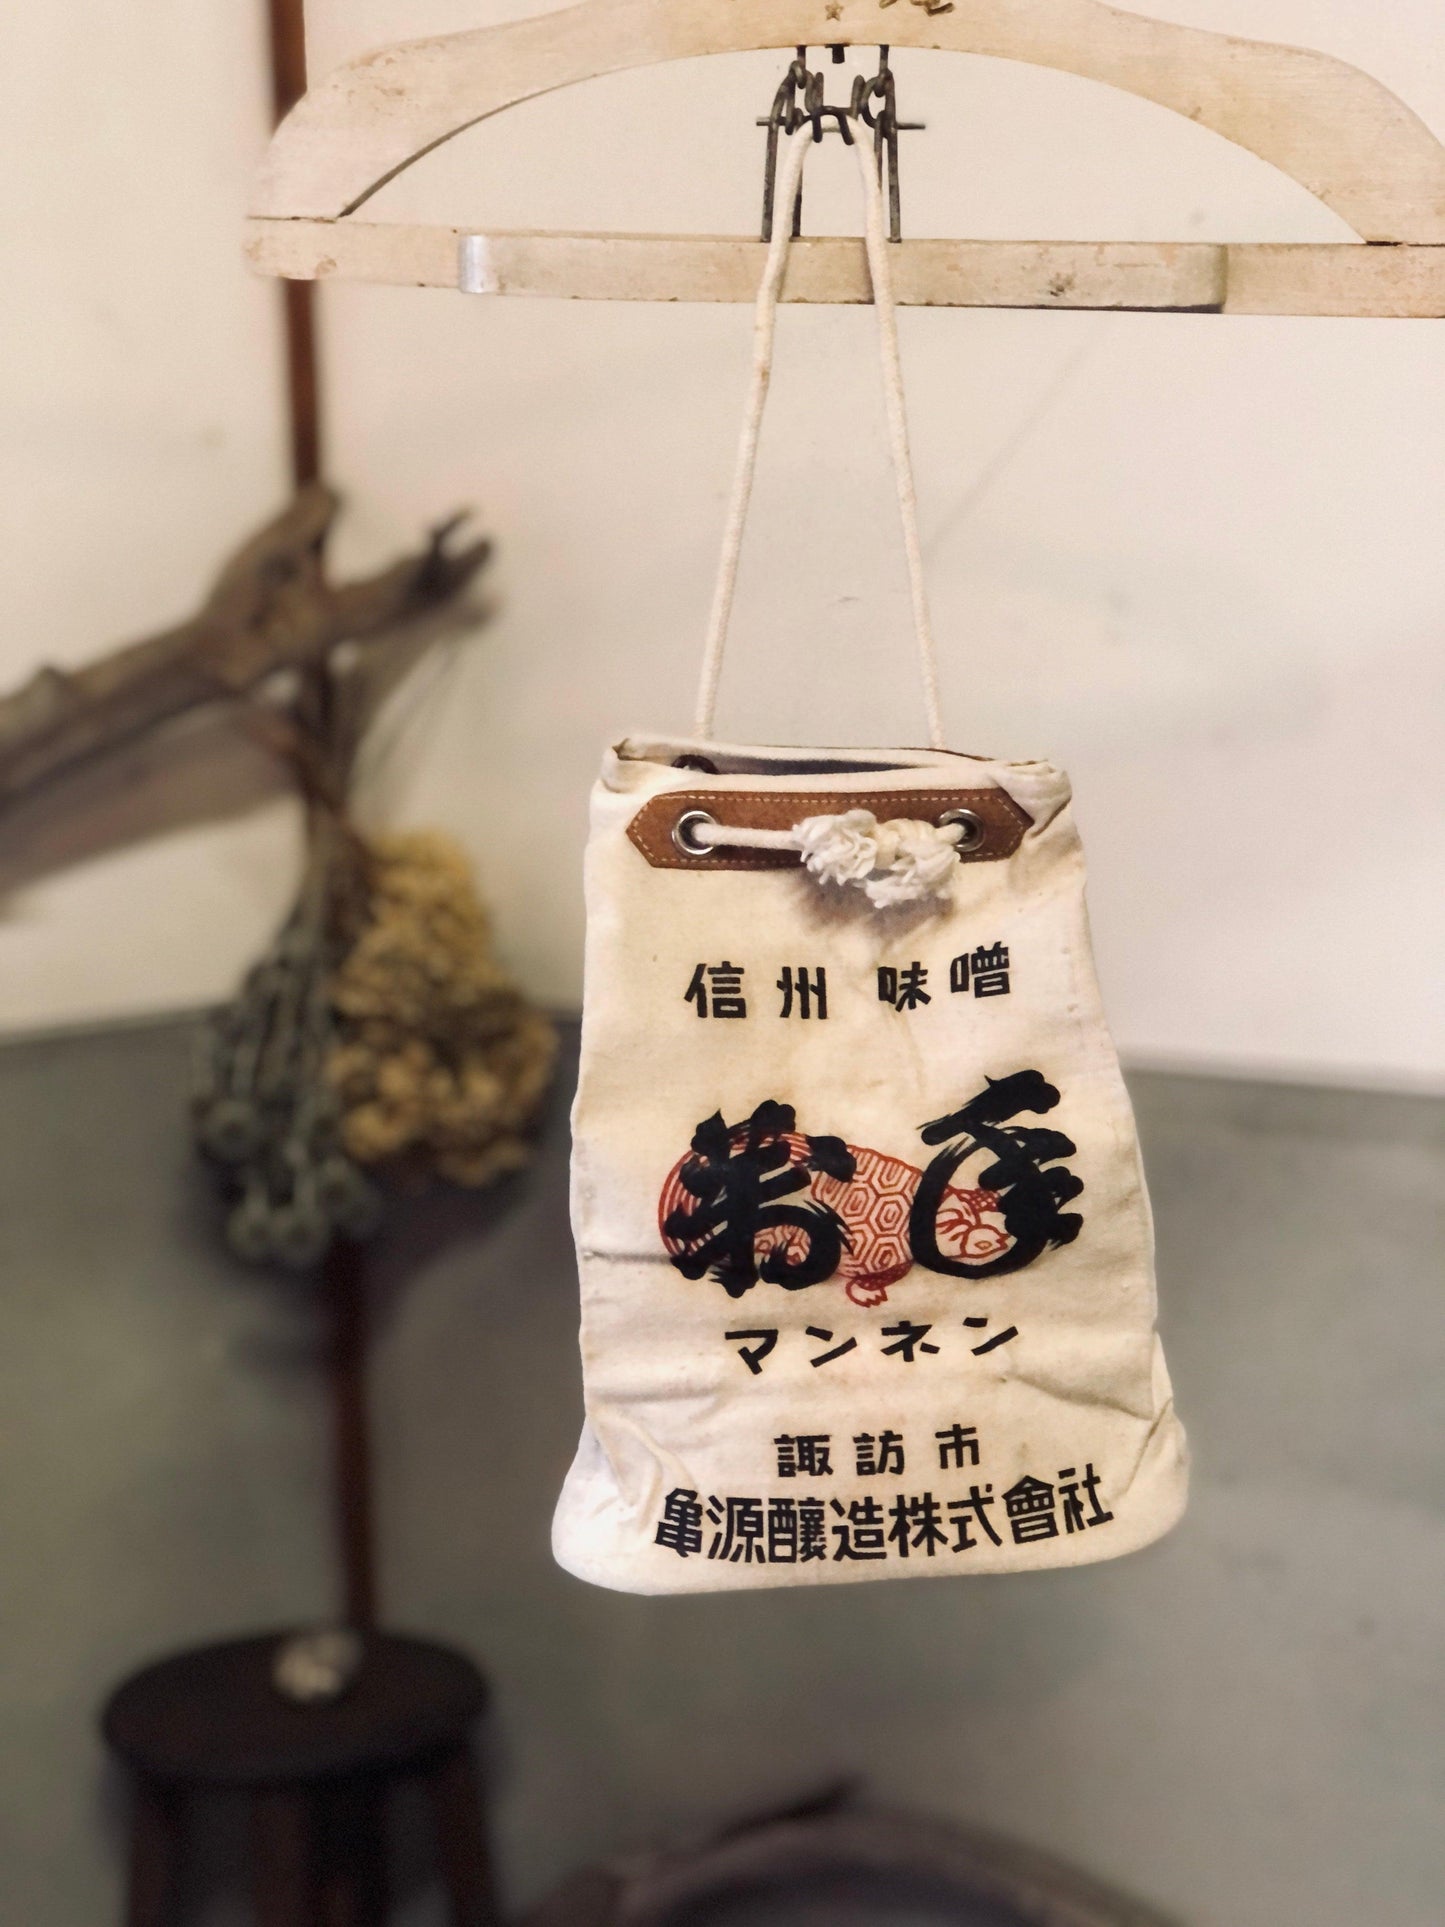 Dead stock Japanese bag from miso and soy sauce brewing company - VINTAGE BLUE JAPAN